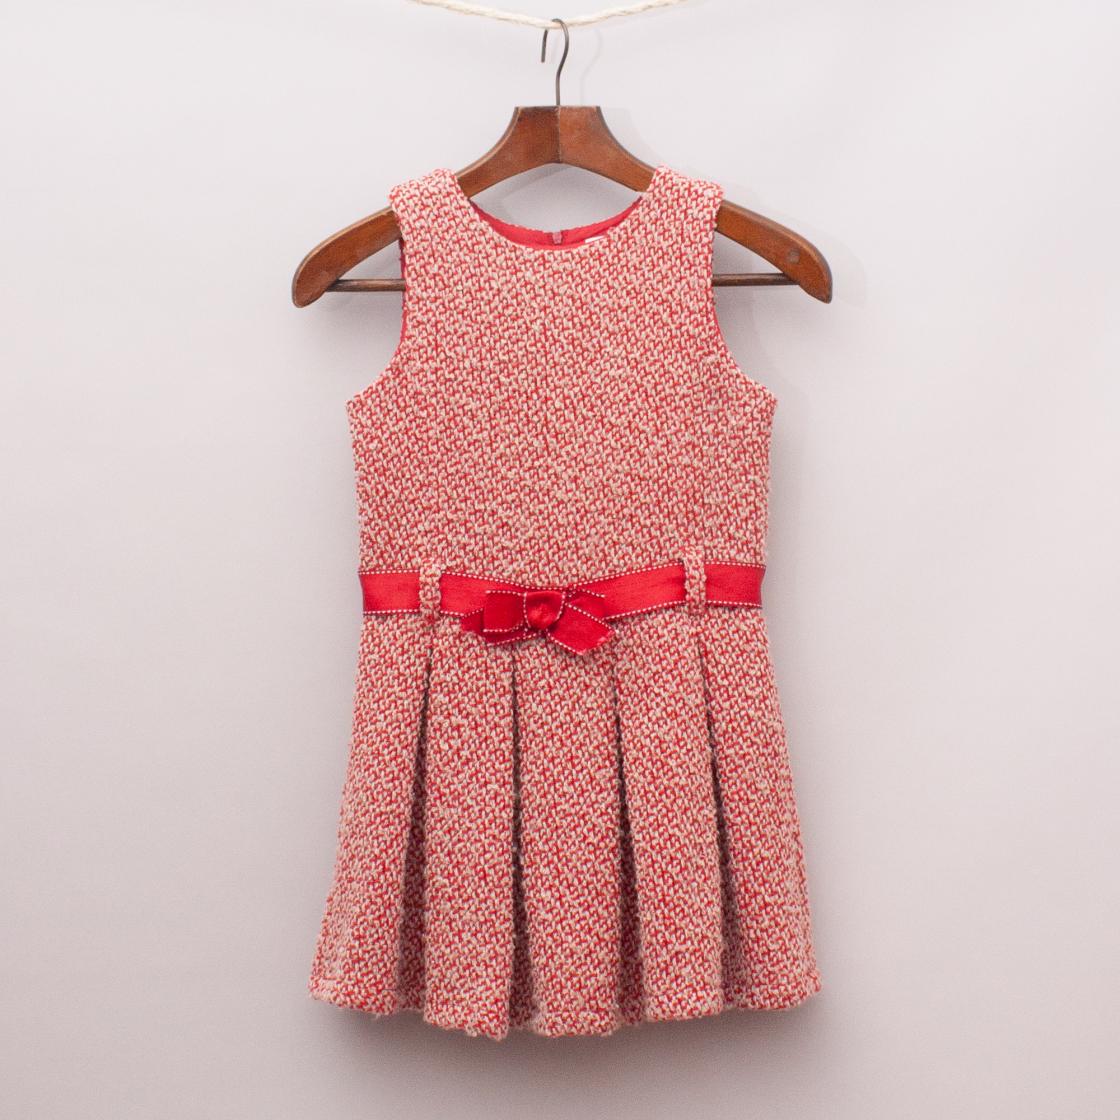 Origami Red Knit Dress